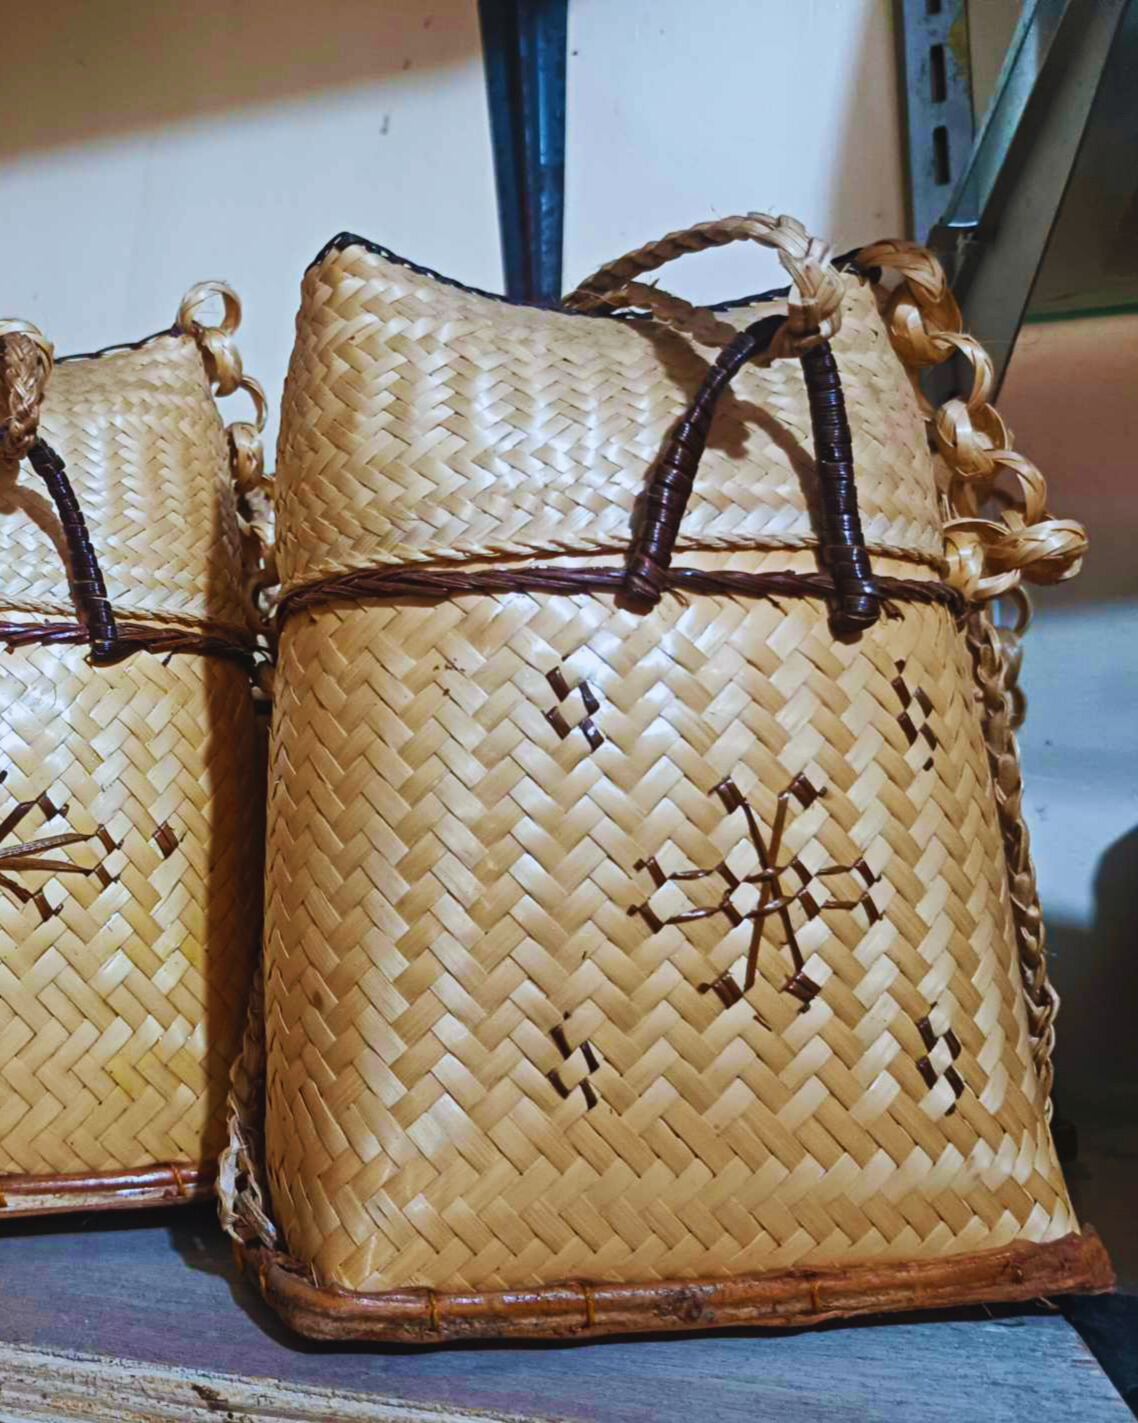 http://www.e-scs.shop/storage/photos/20/Products/Bamboo Pack Bag.jpg